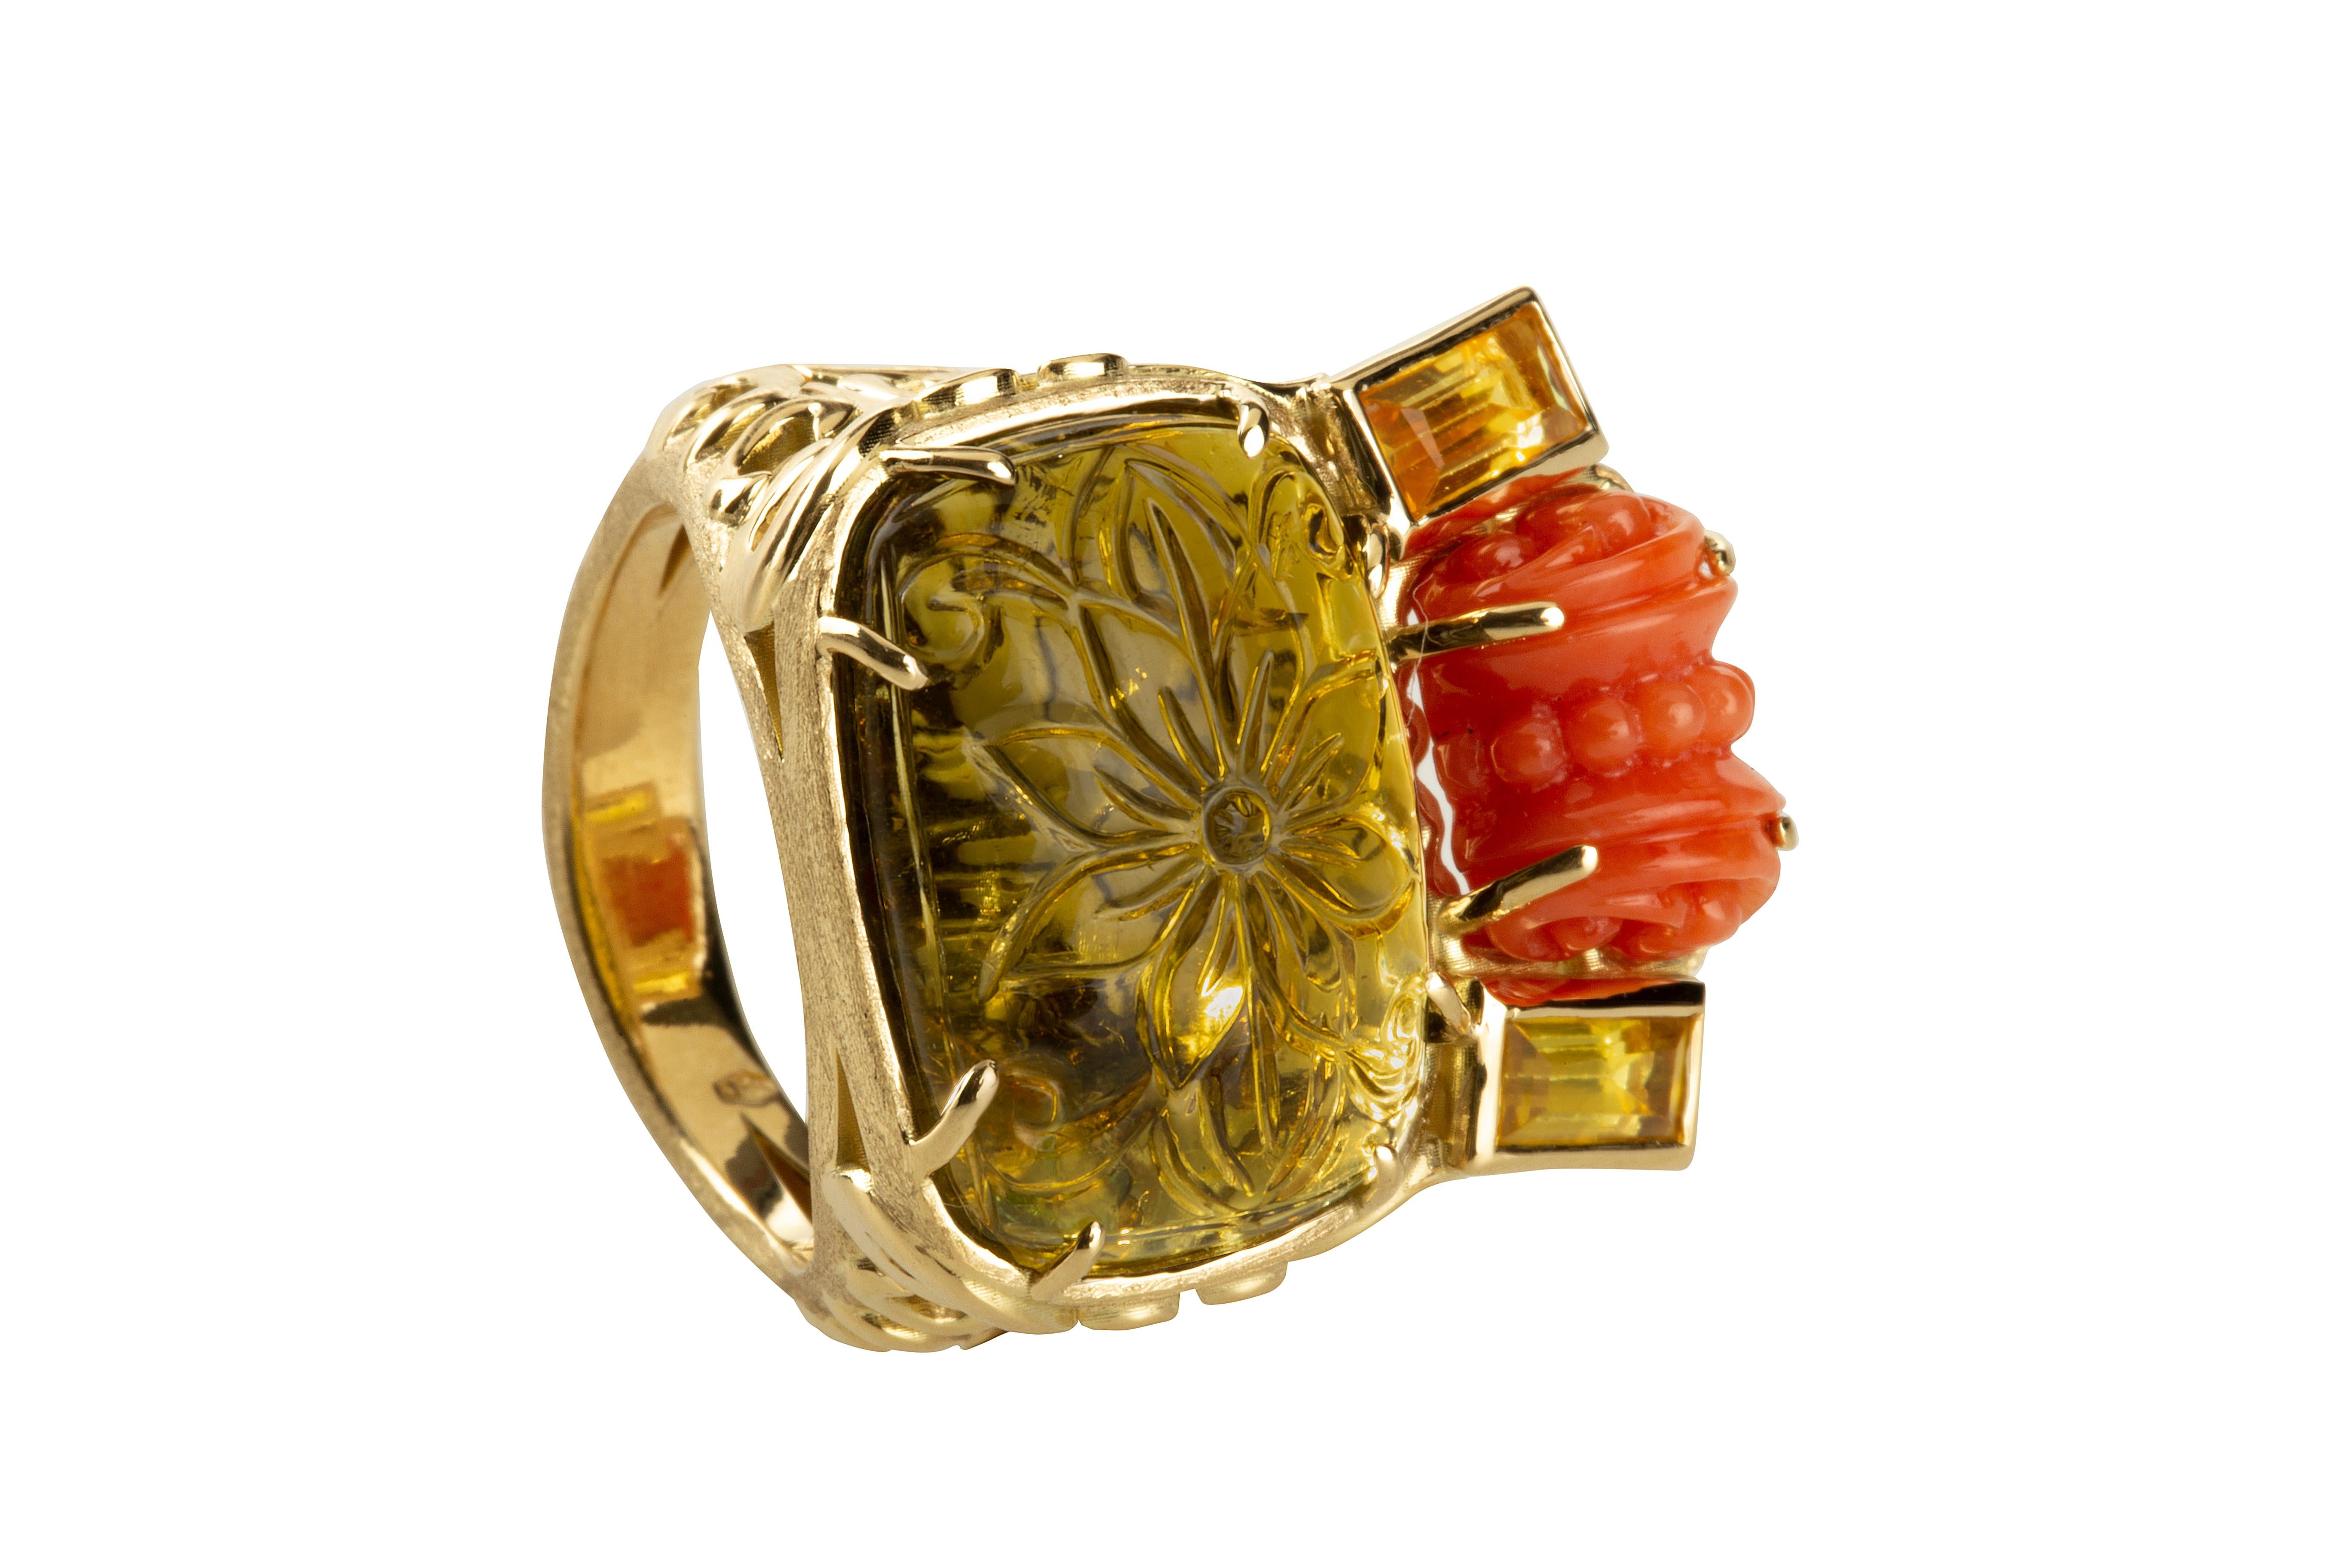 Carved Tourmaline cts 5 with Scicca carved Italian coral 18 kt Gold gr. 21 size 14 eu, yellow sapphire baguette.
All Giulia Colussi jewelry is new and has never been previously owned or worn. Each item will arrive at your door beautifully gift